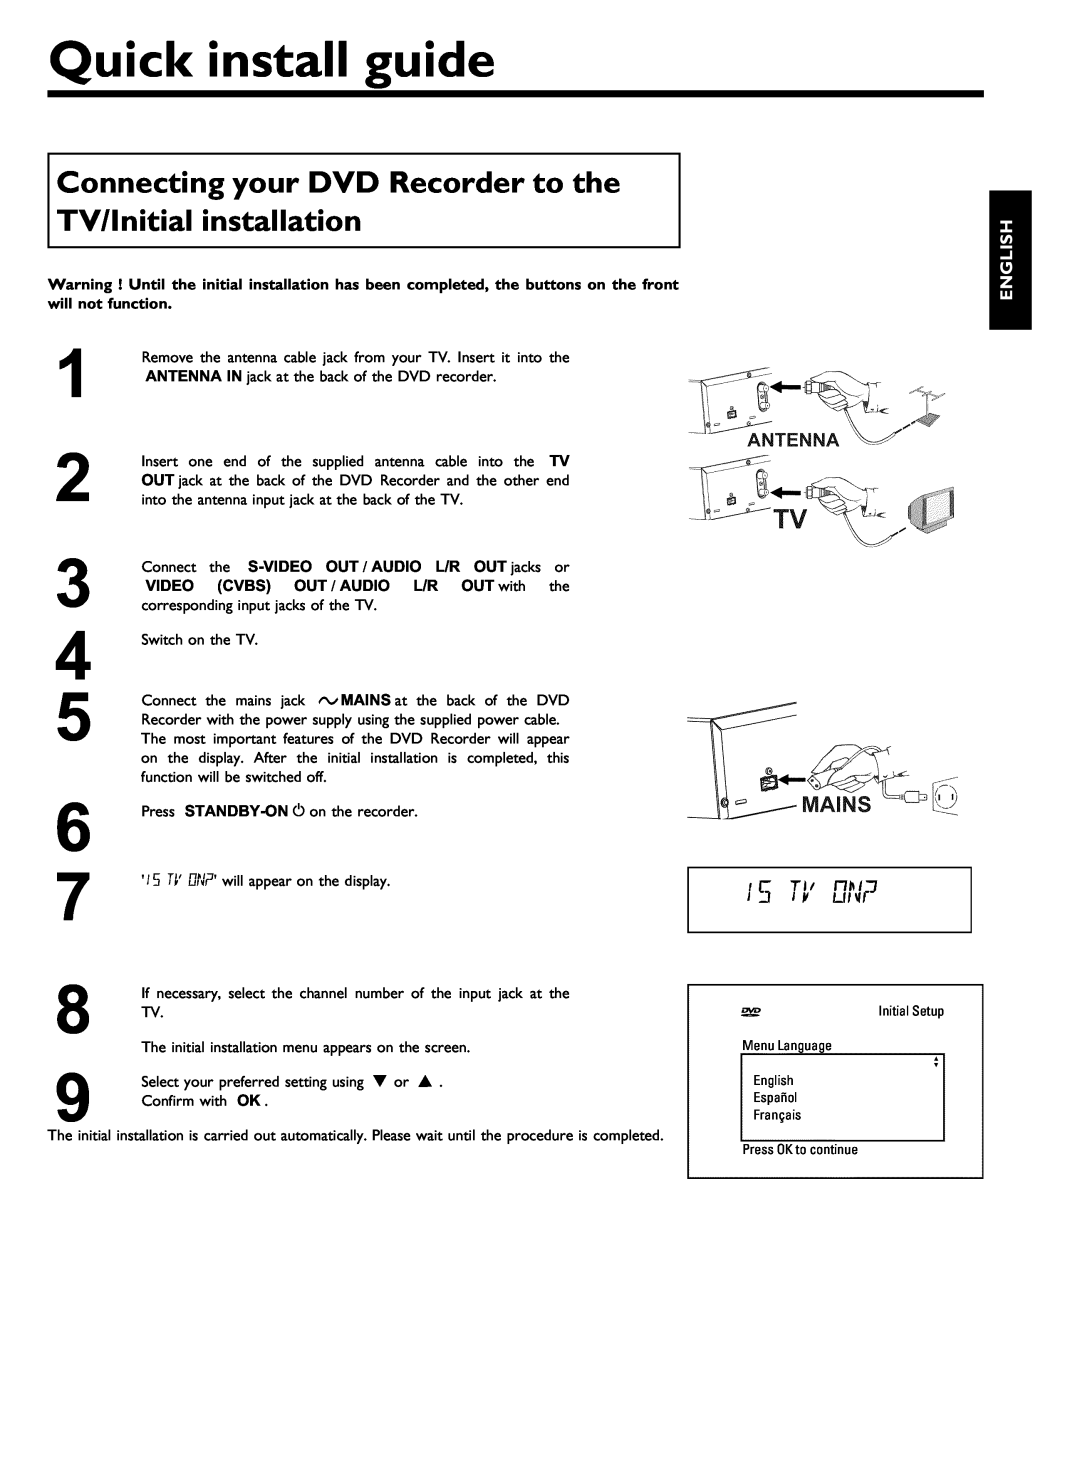 Philips DVDR77/17 manual Quick install guide, Connecting your DVD Recorder to the TV/Initial installation, English, Video 